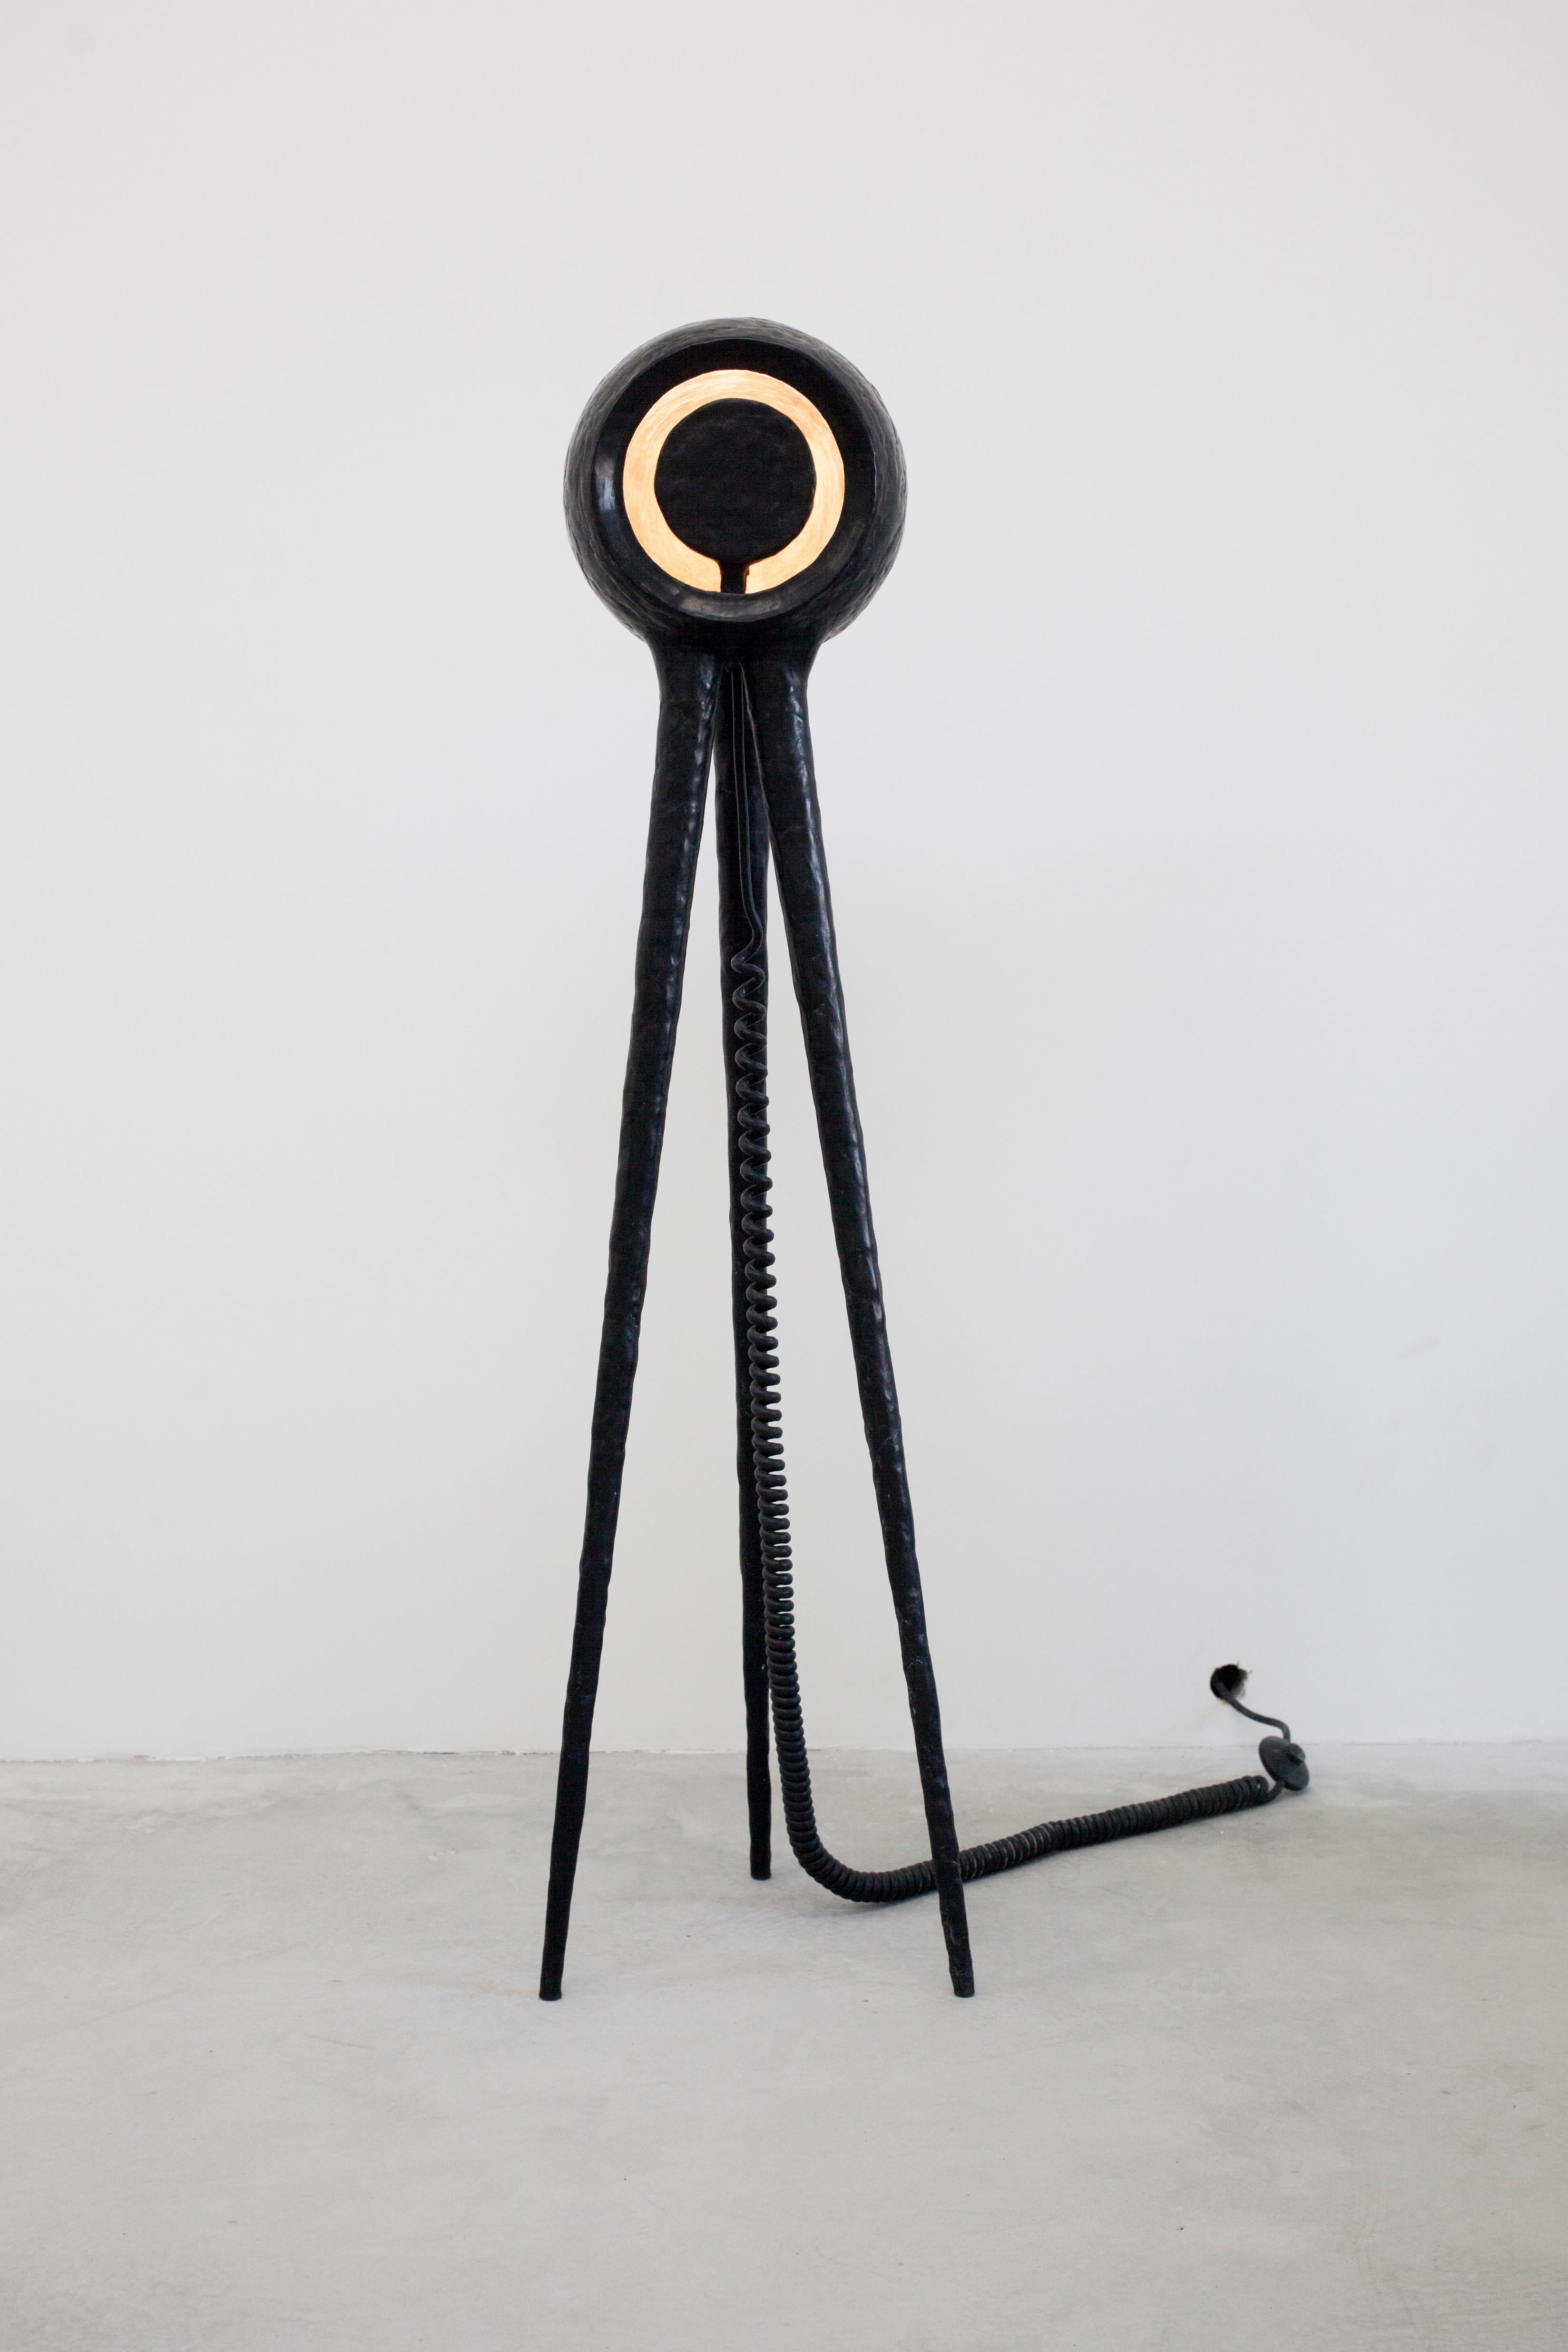 Material Lust [American, b.1981,1986]
Special Edition Crepuscule Floor Lamp, 2017 
Shown in black epoxy with brushed brass interior 
Measures 58